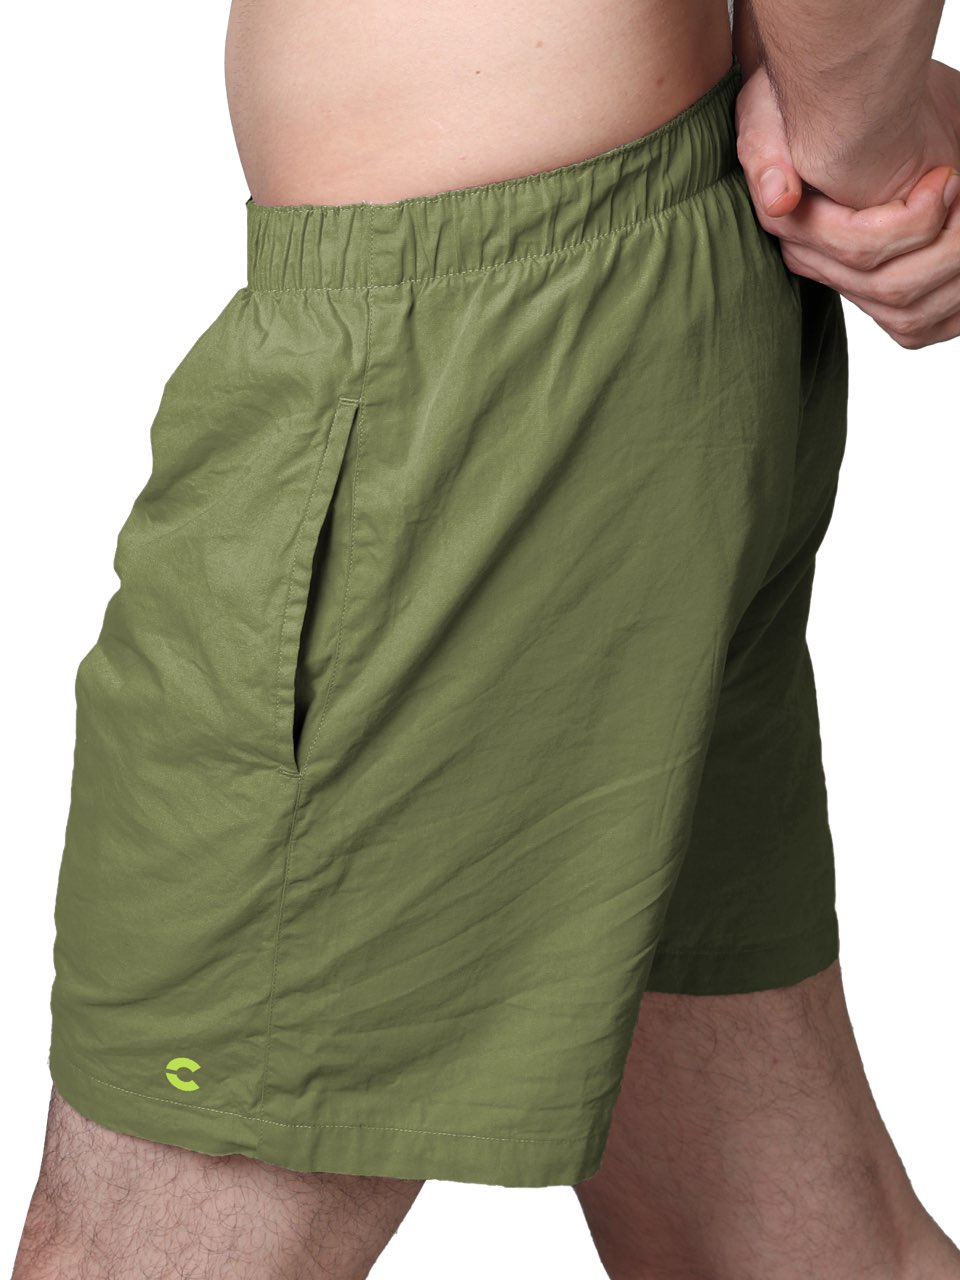 All-Day Boxer Shorts - (Pack of 2)